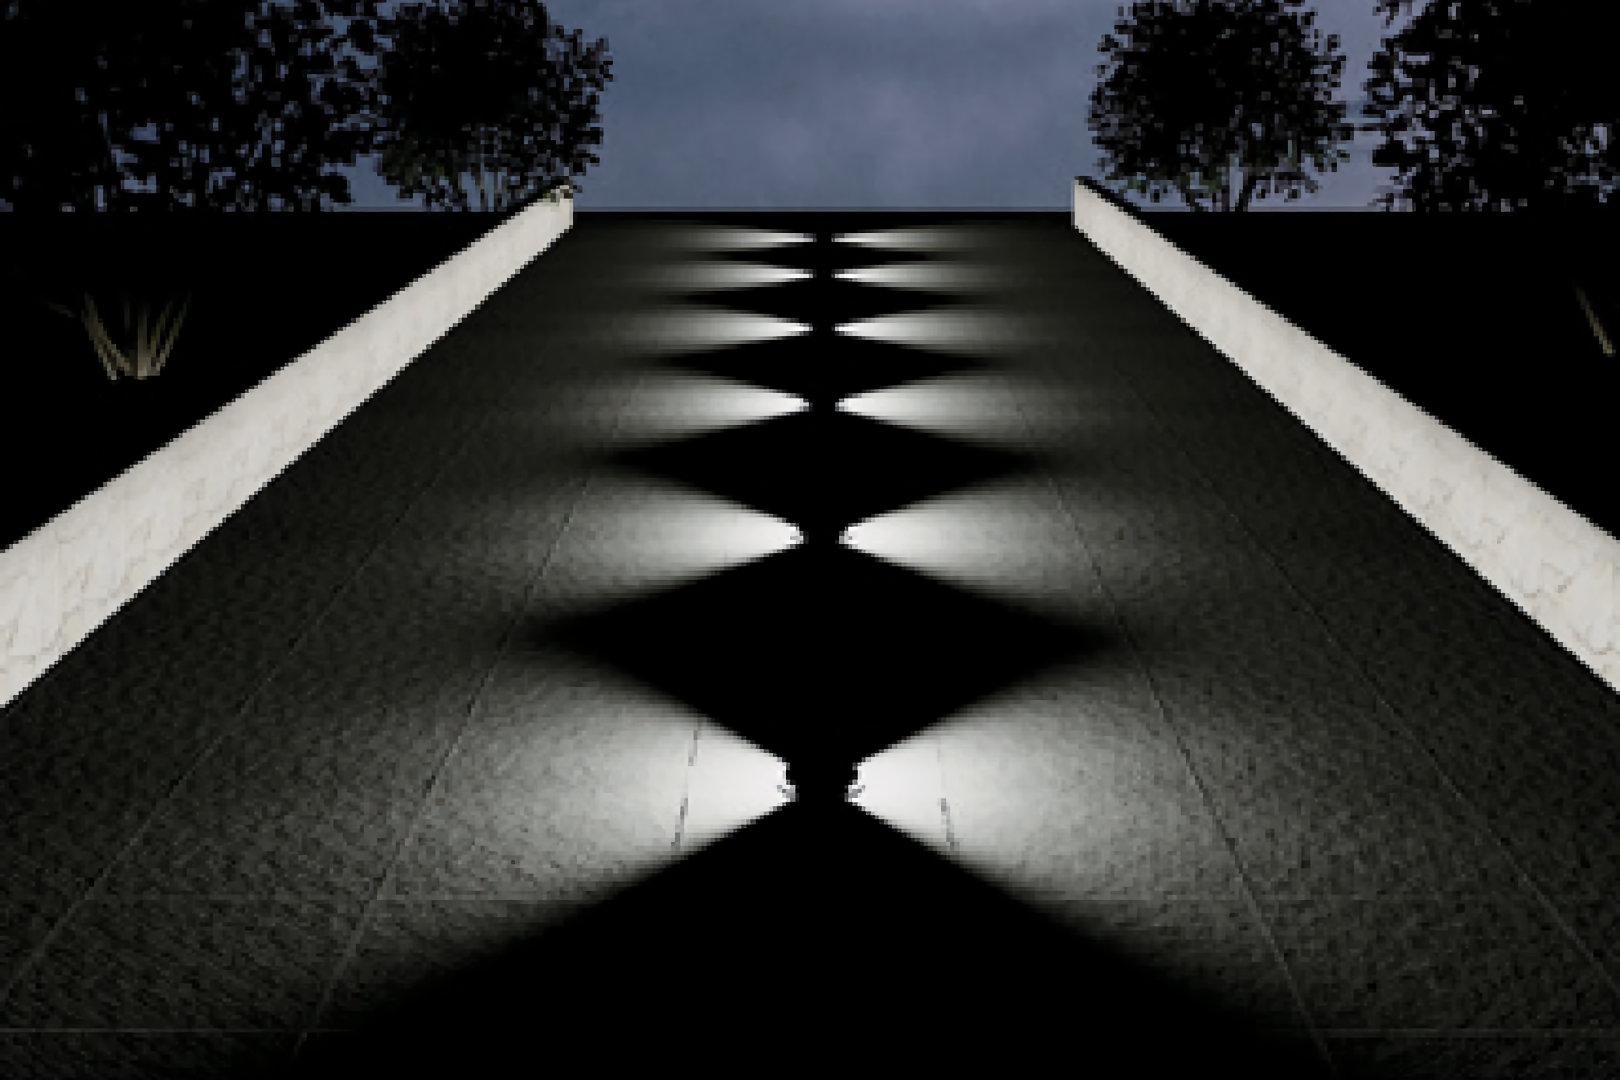 microngroup-led-lighting-outdoor-driveway